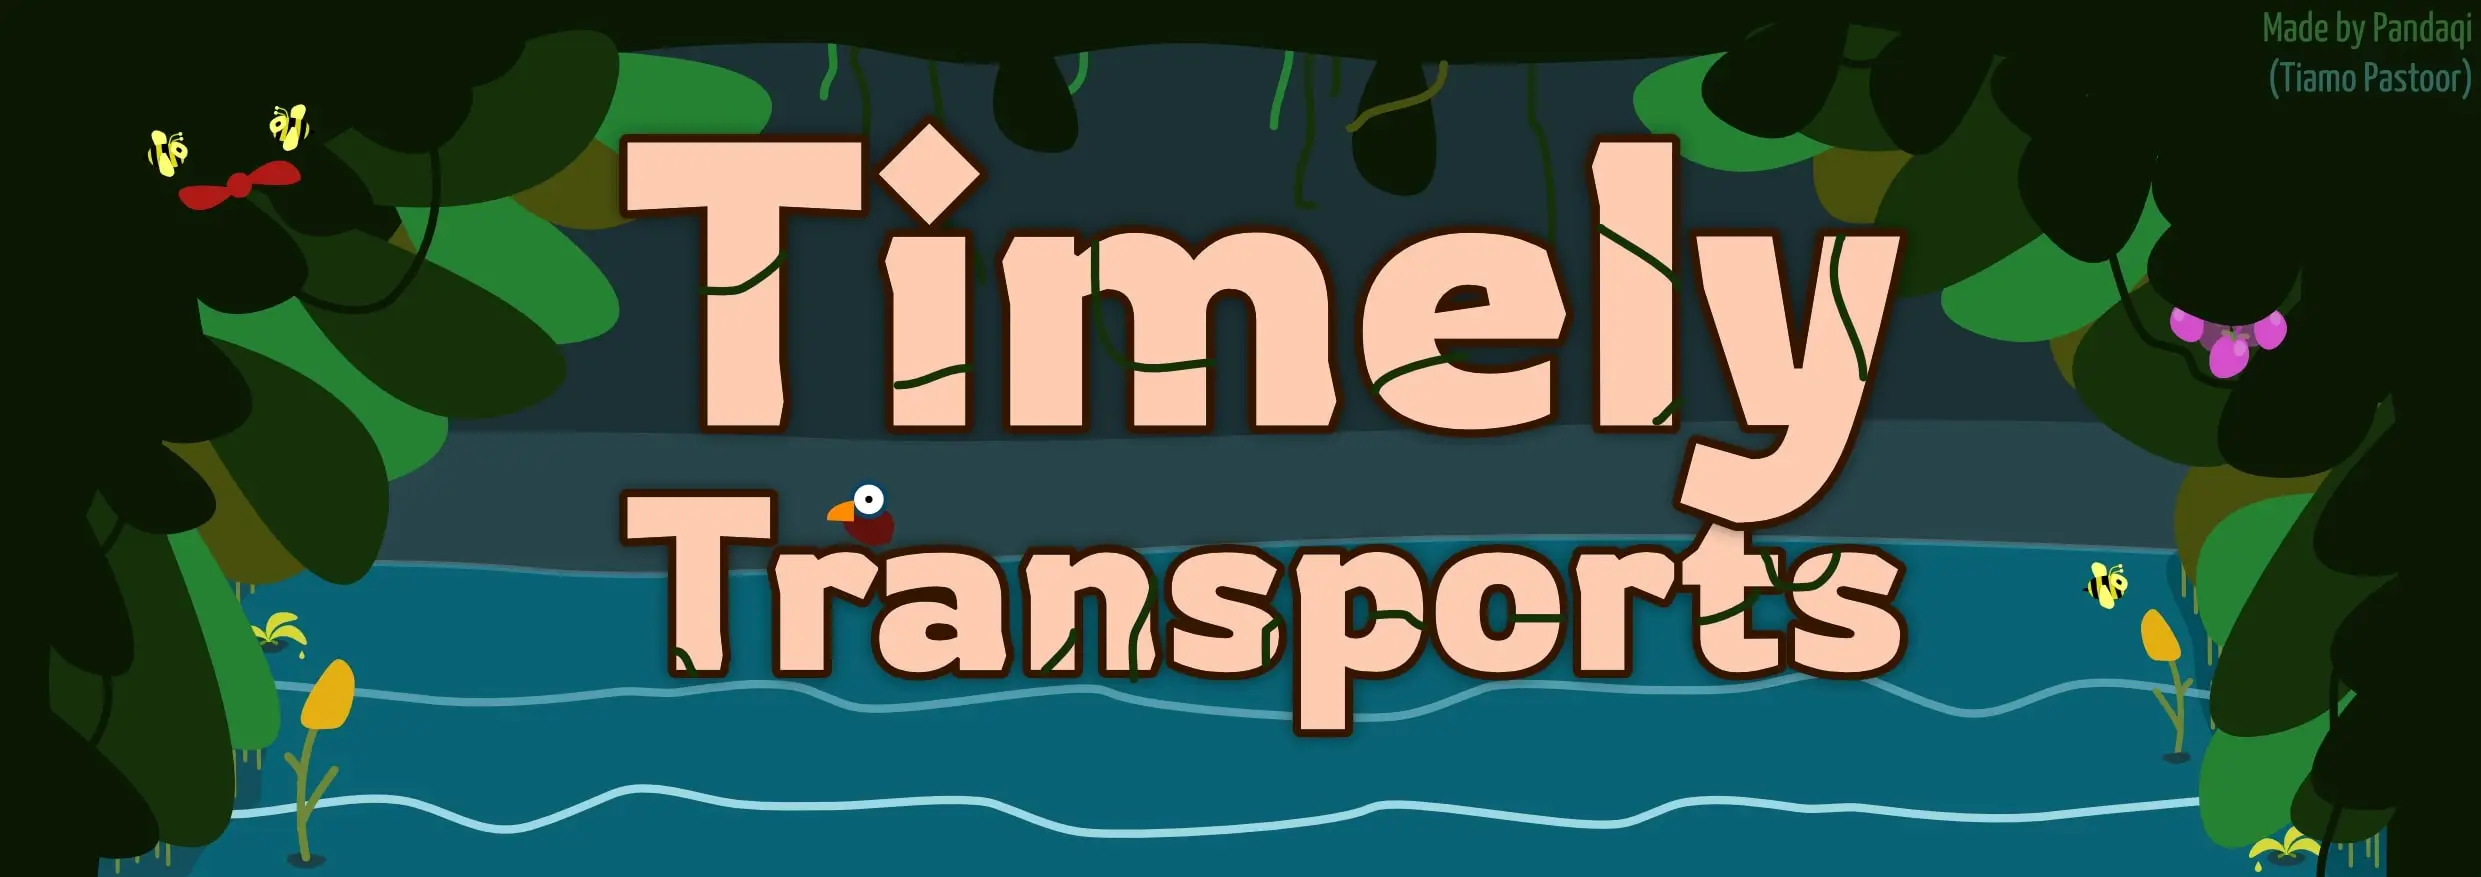 Thumbnail / Header for article: Timely Transports (Part 3)